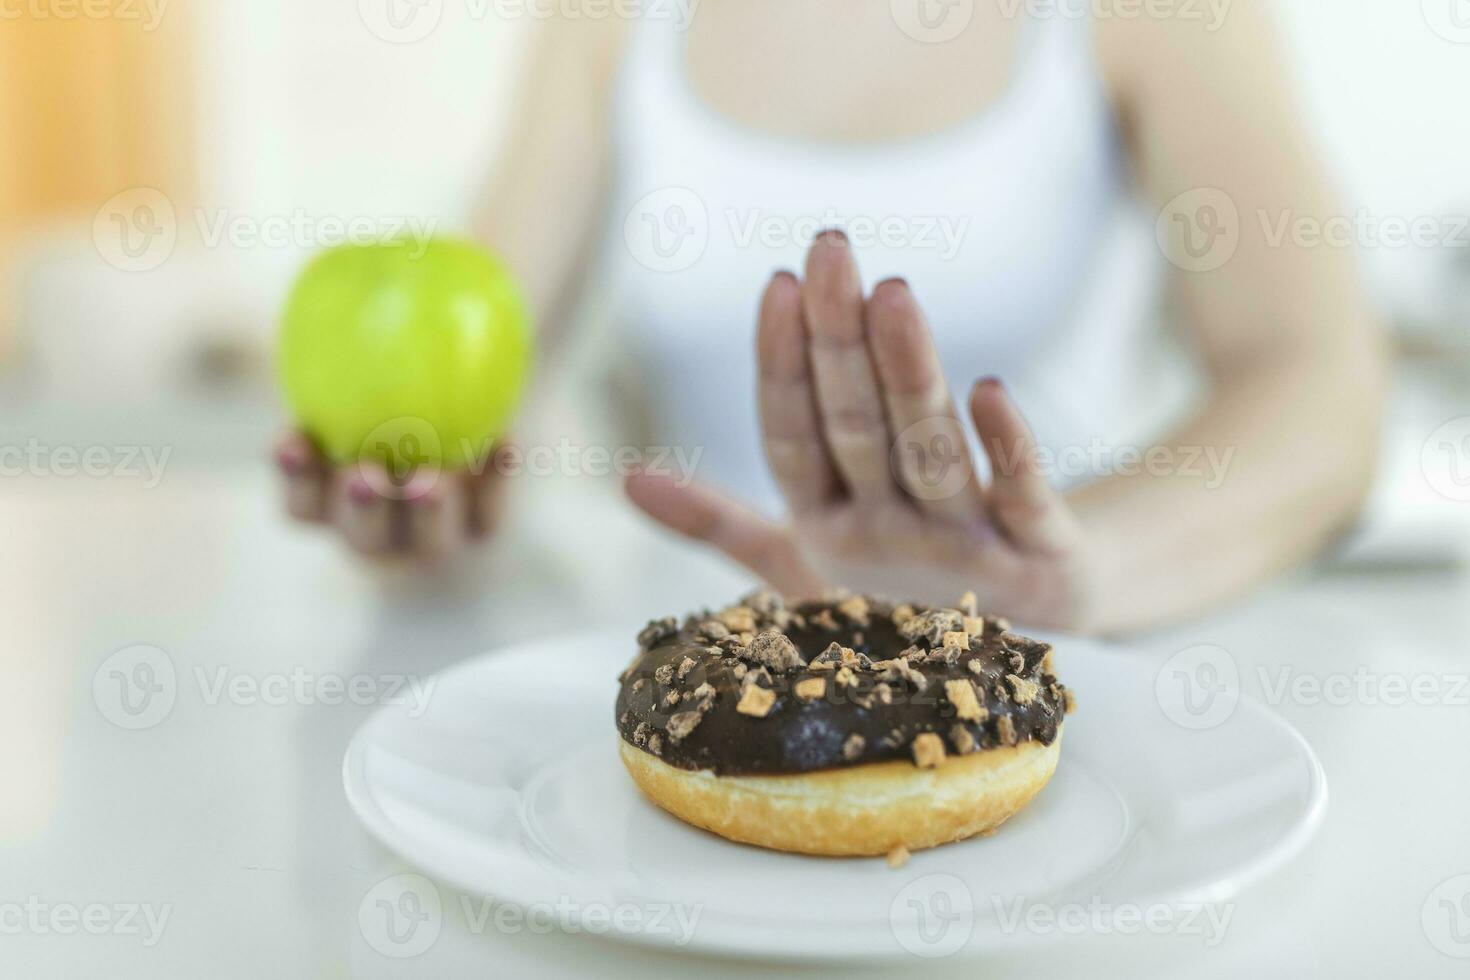 Dieting or good health concept. Young woman rejecting Junk food or unhealthy food such as donut or dessert and choosing healthy food such as fresh fruit or vegetable. photo